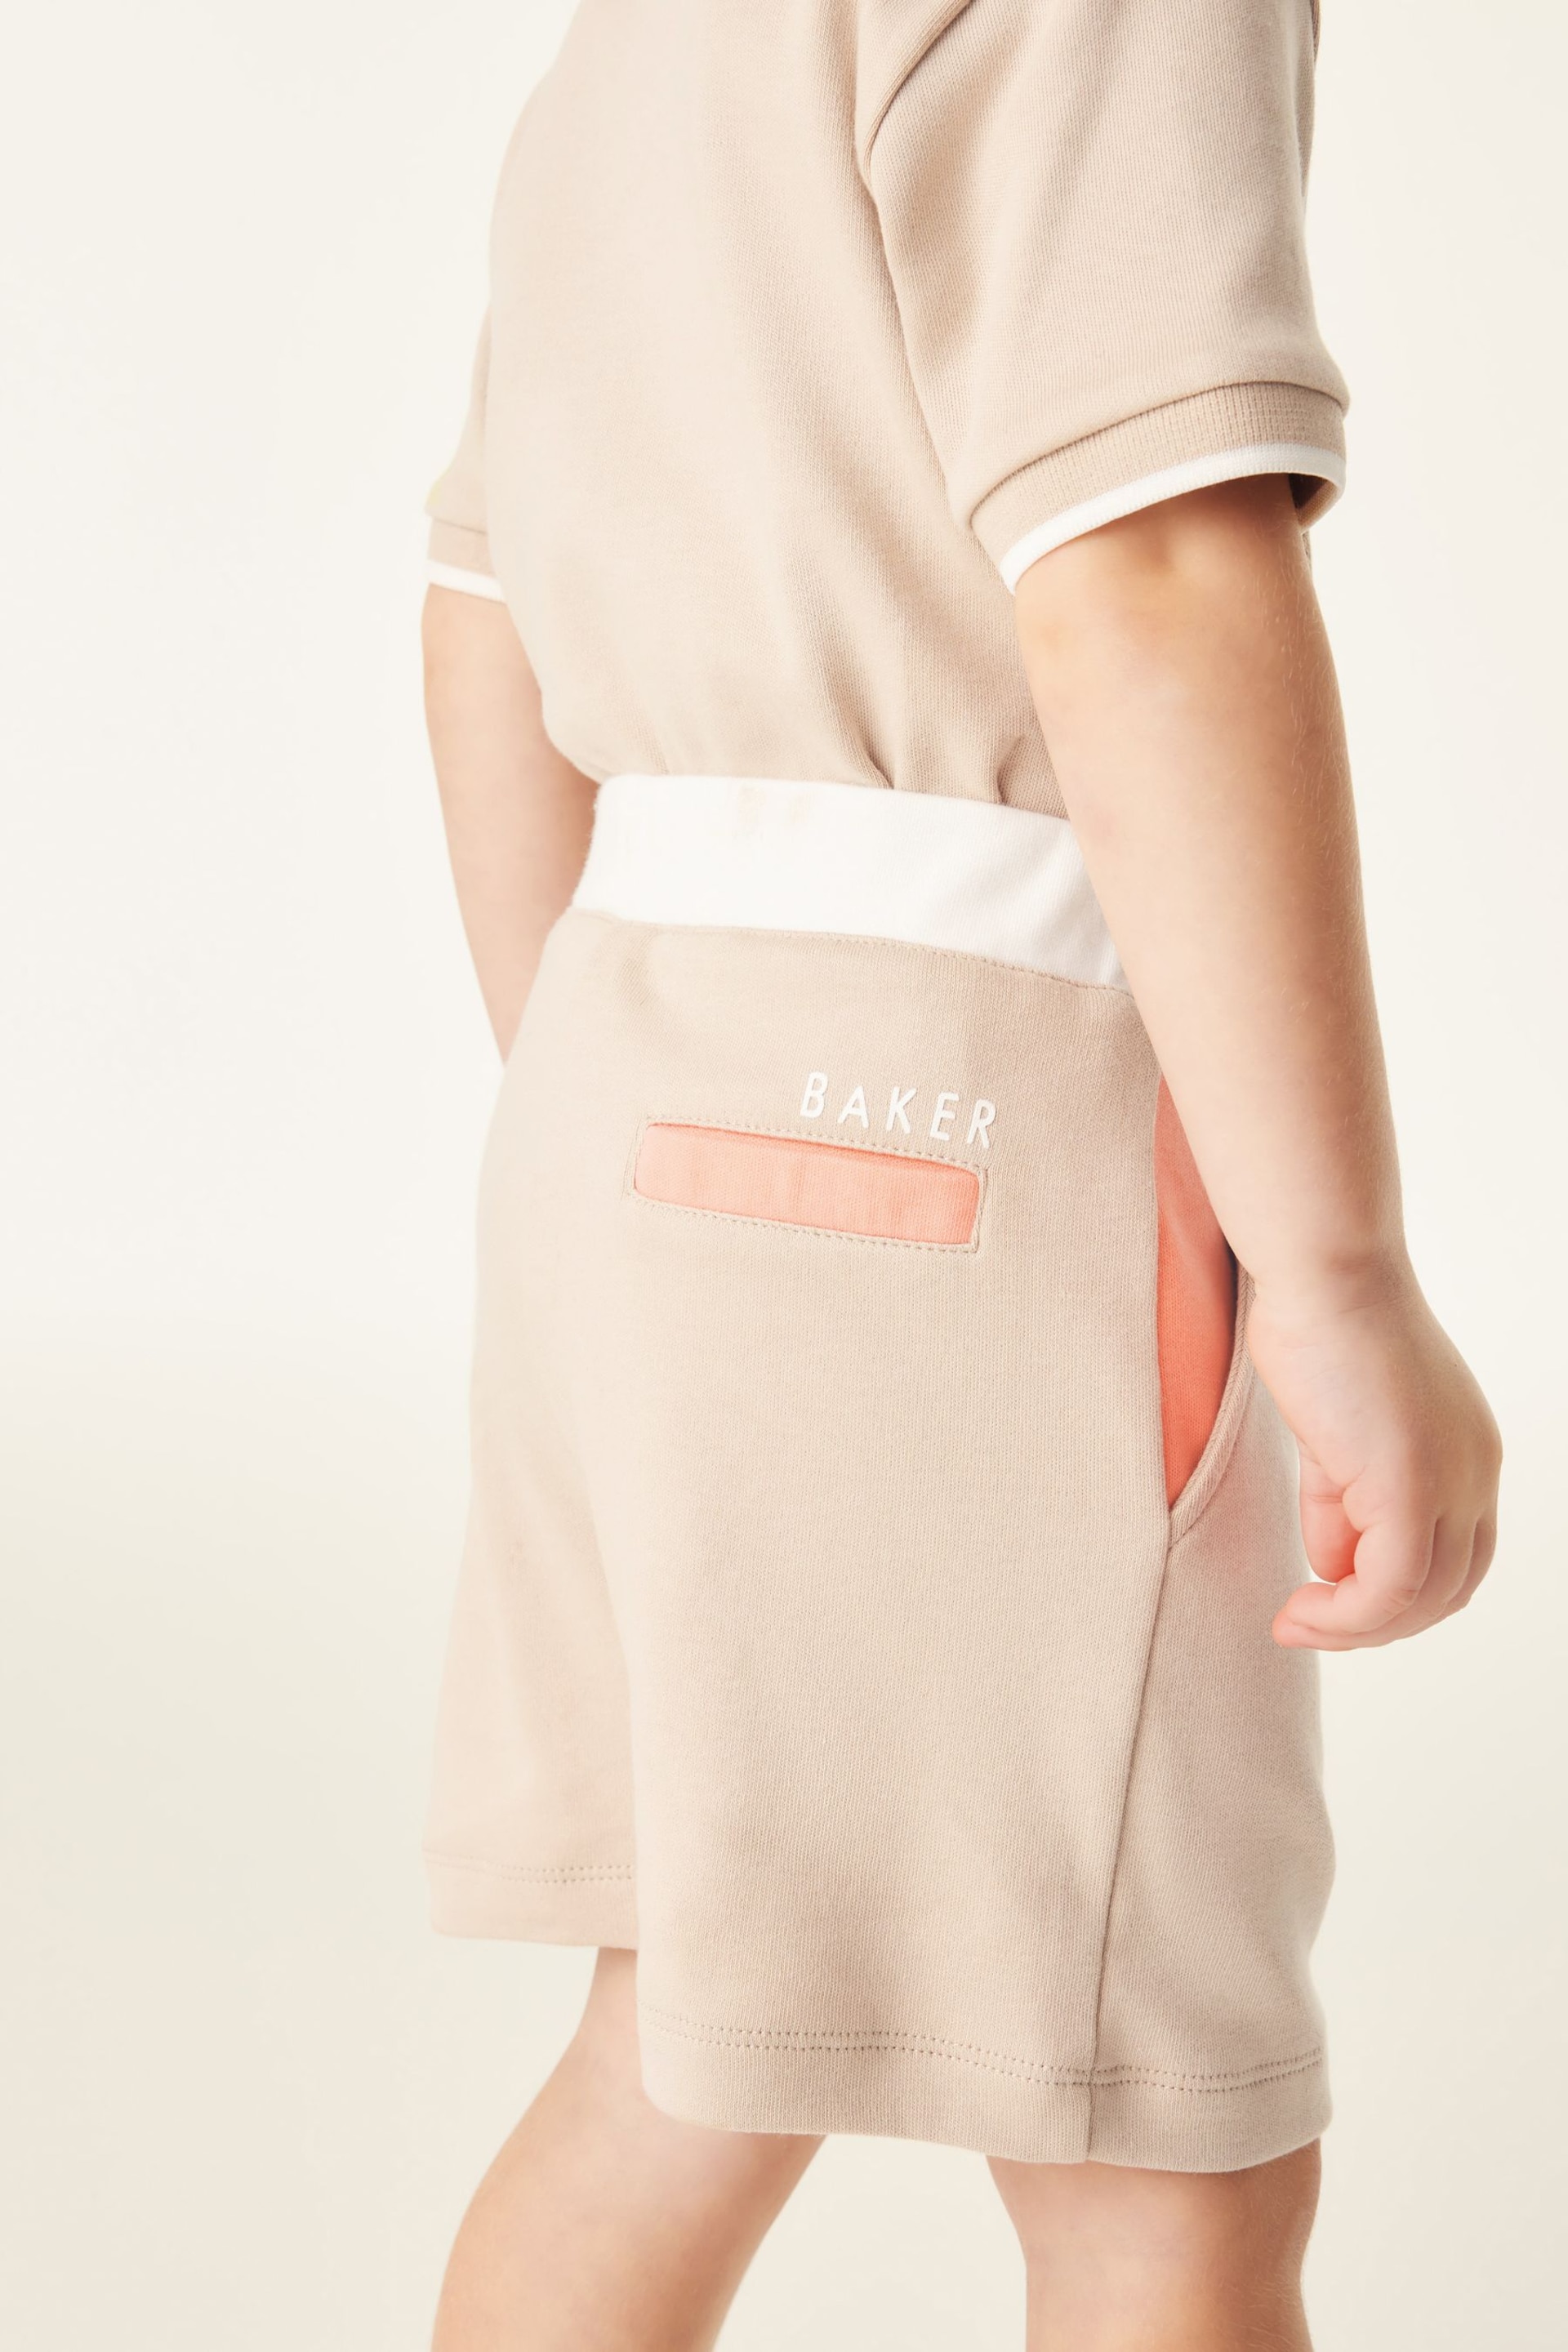 Baker by Ted Baker Colourblock Polo Shirt and Short Set - Image 5 of 11